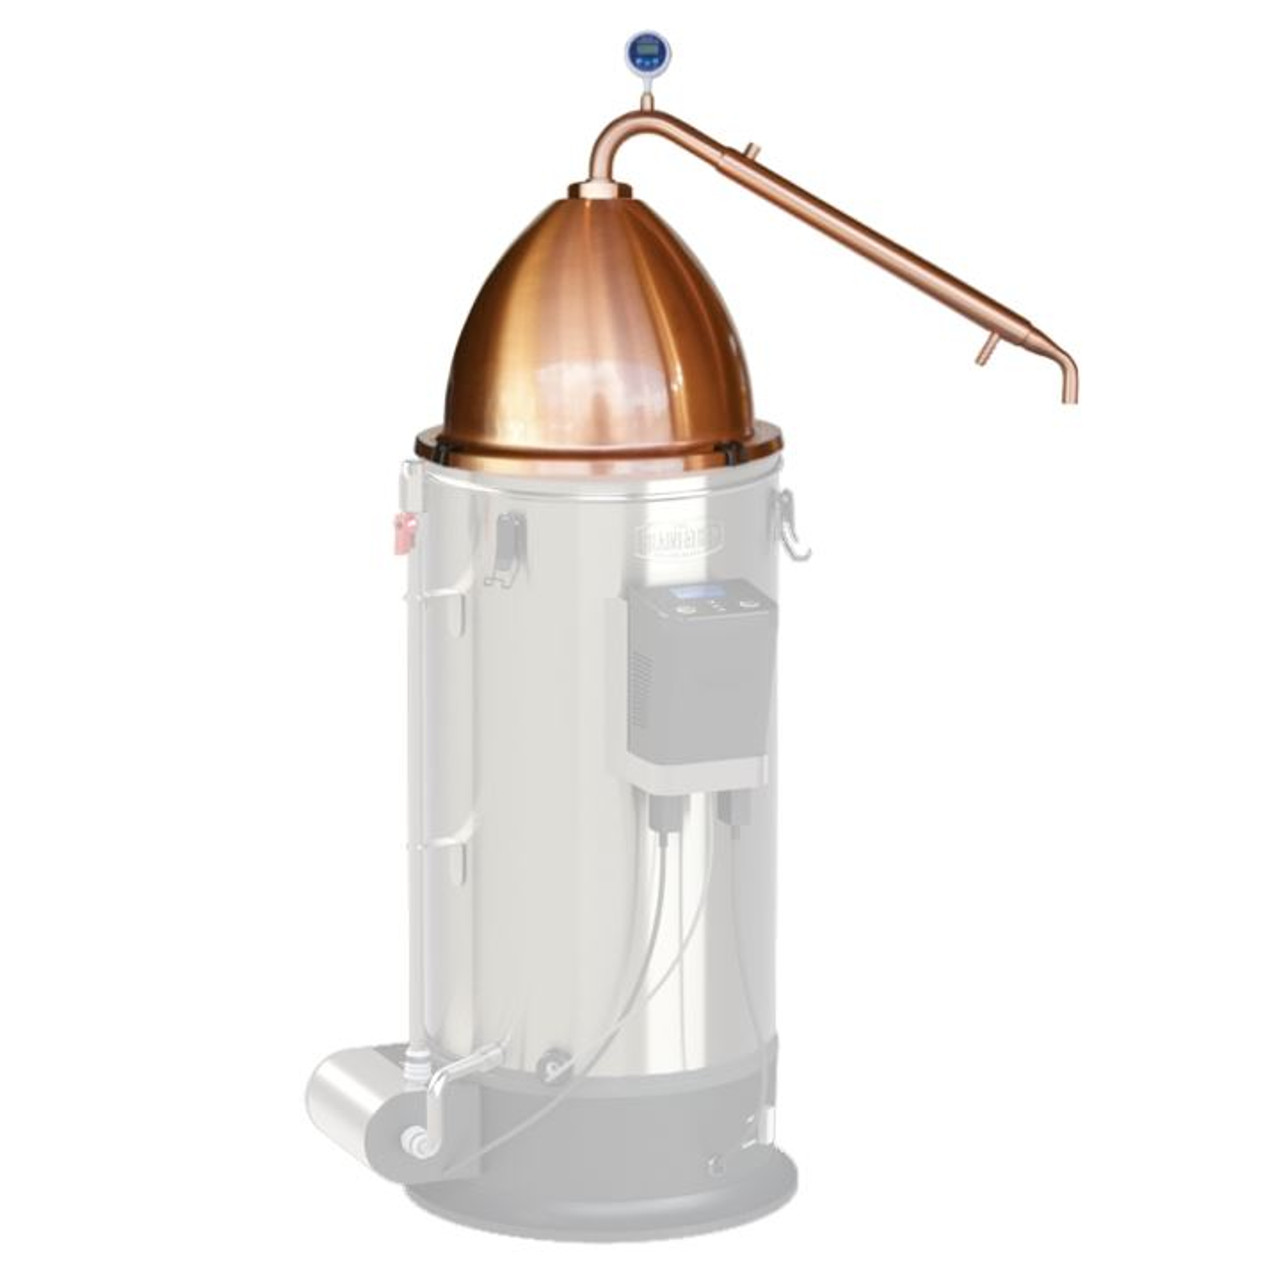 Grainfather Pot Still Alembic Copper Dome Top and Copper Condensor for the G30